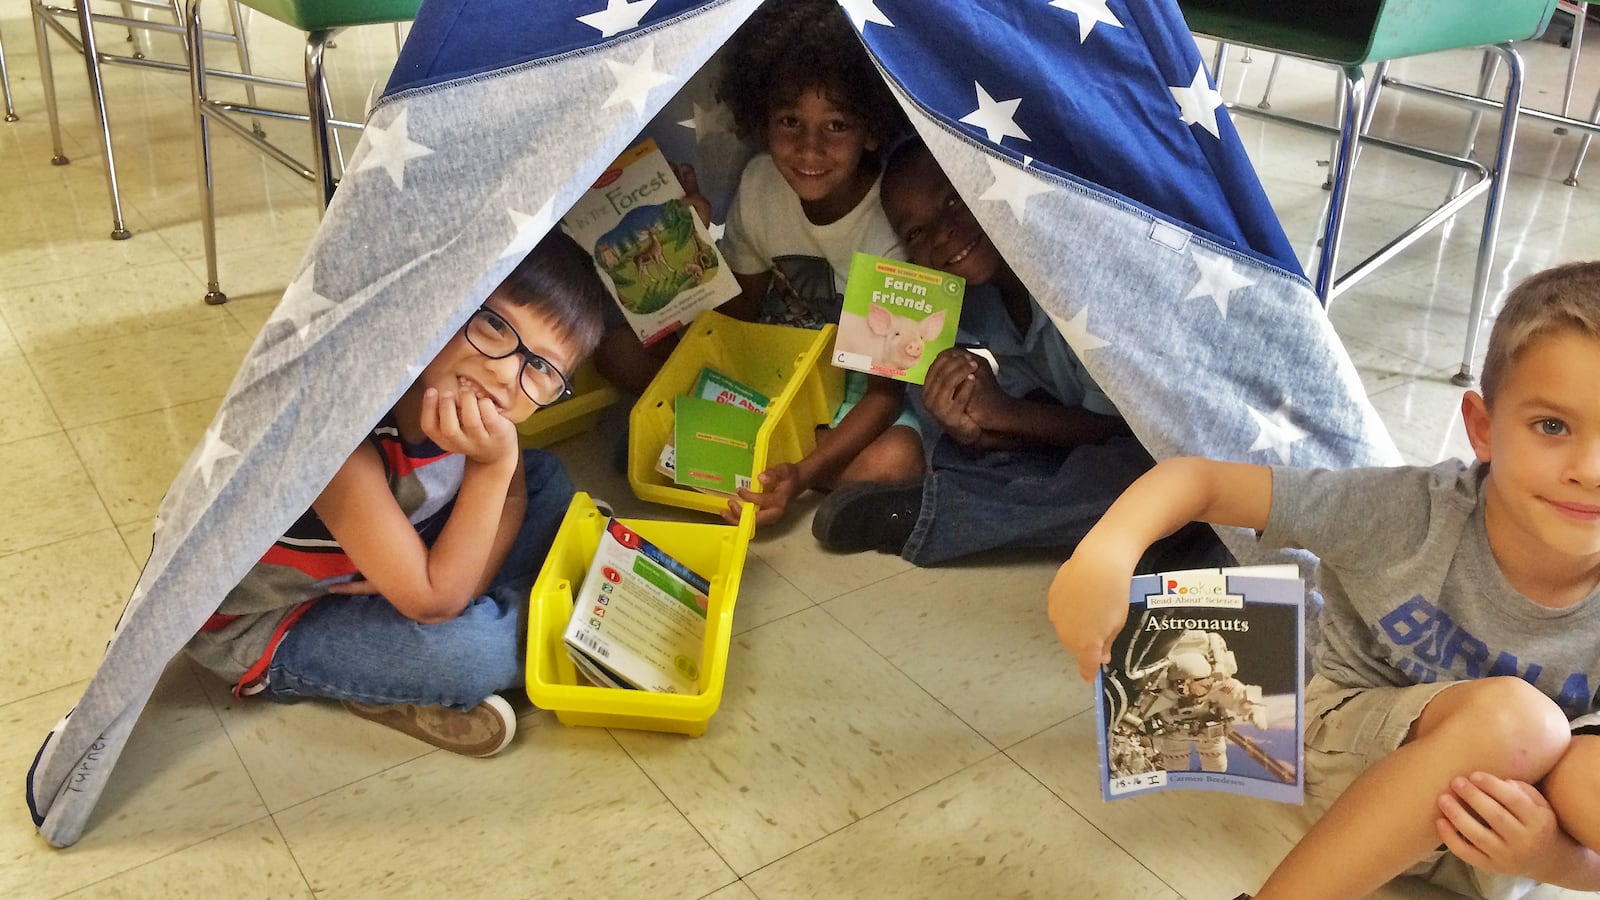 Children participate in a 2016 summer reading program in Lauderdale County in West Tennessee as part of the new grant-based literacy program overseen by the Tennessee Department of Education.